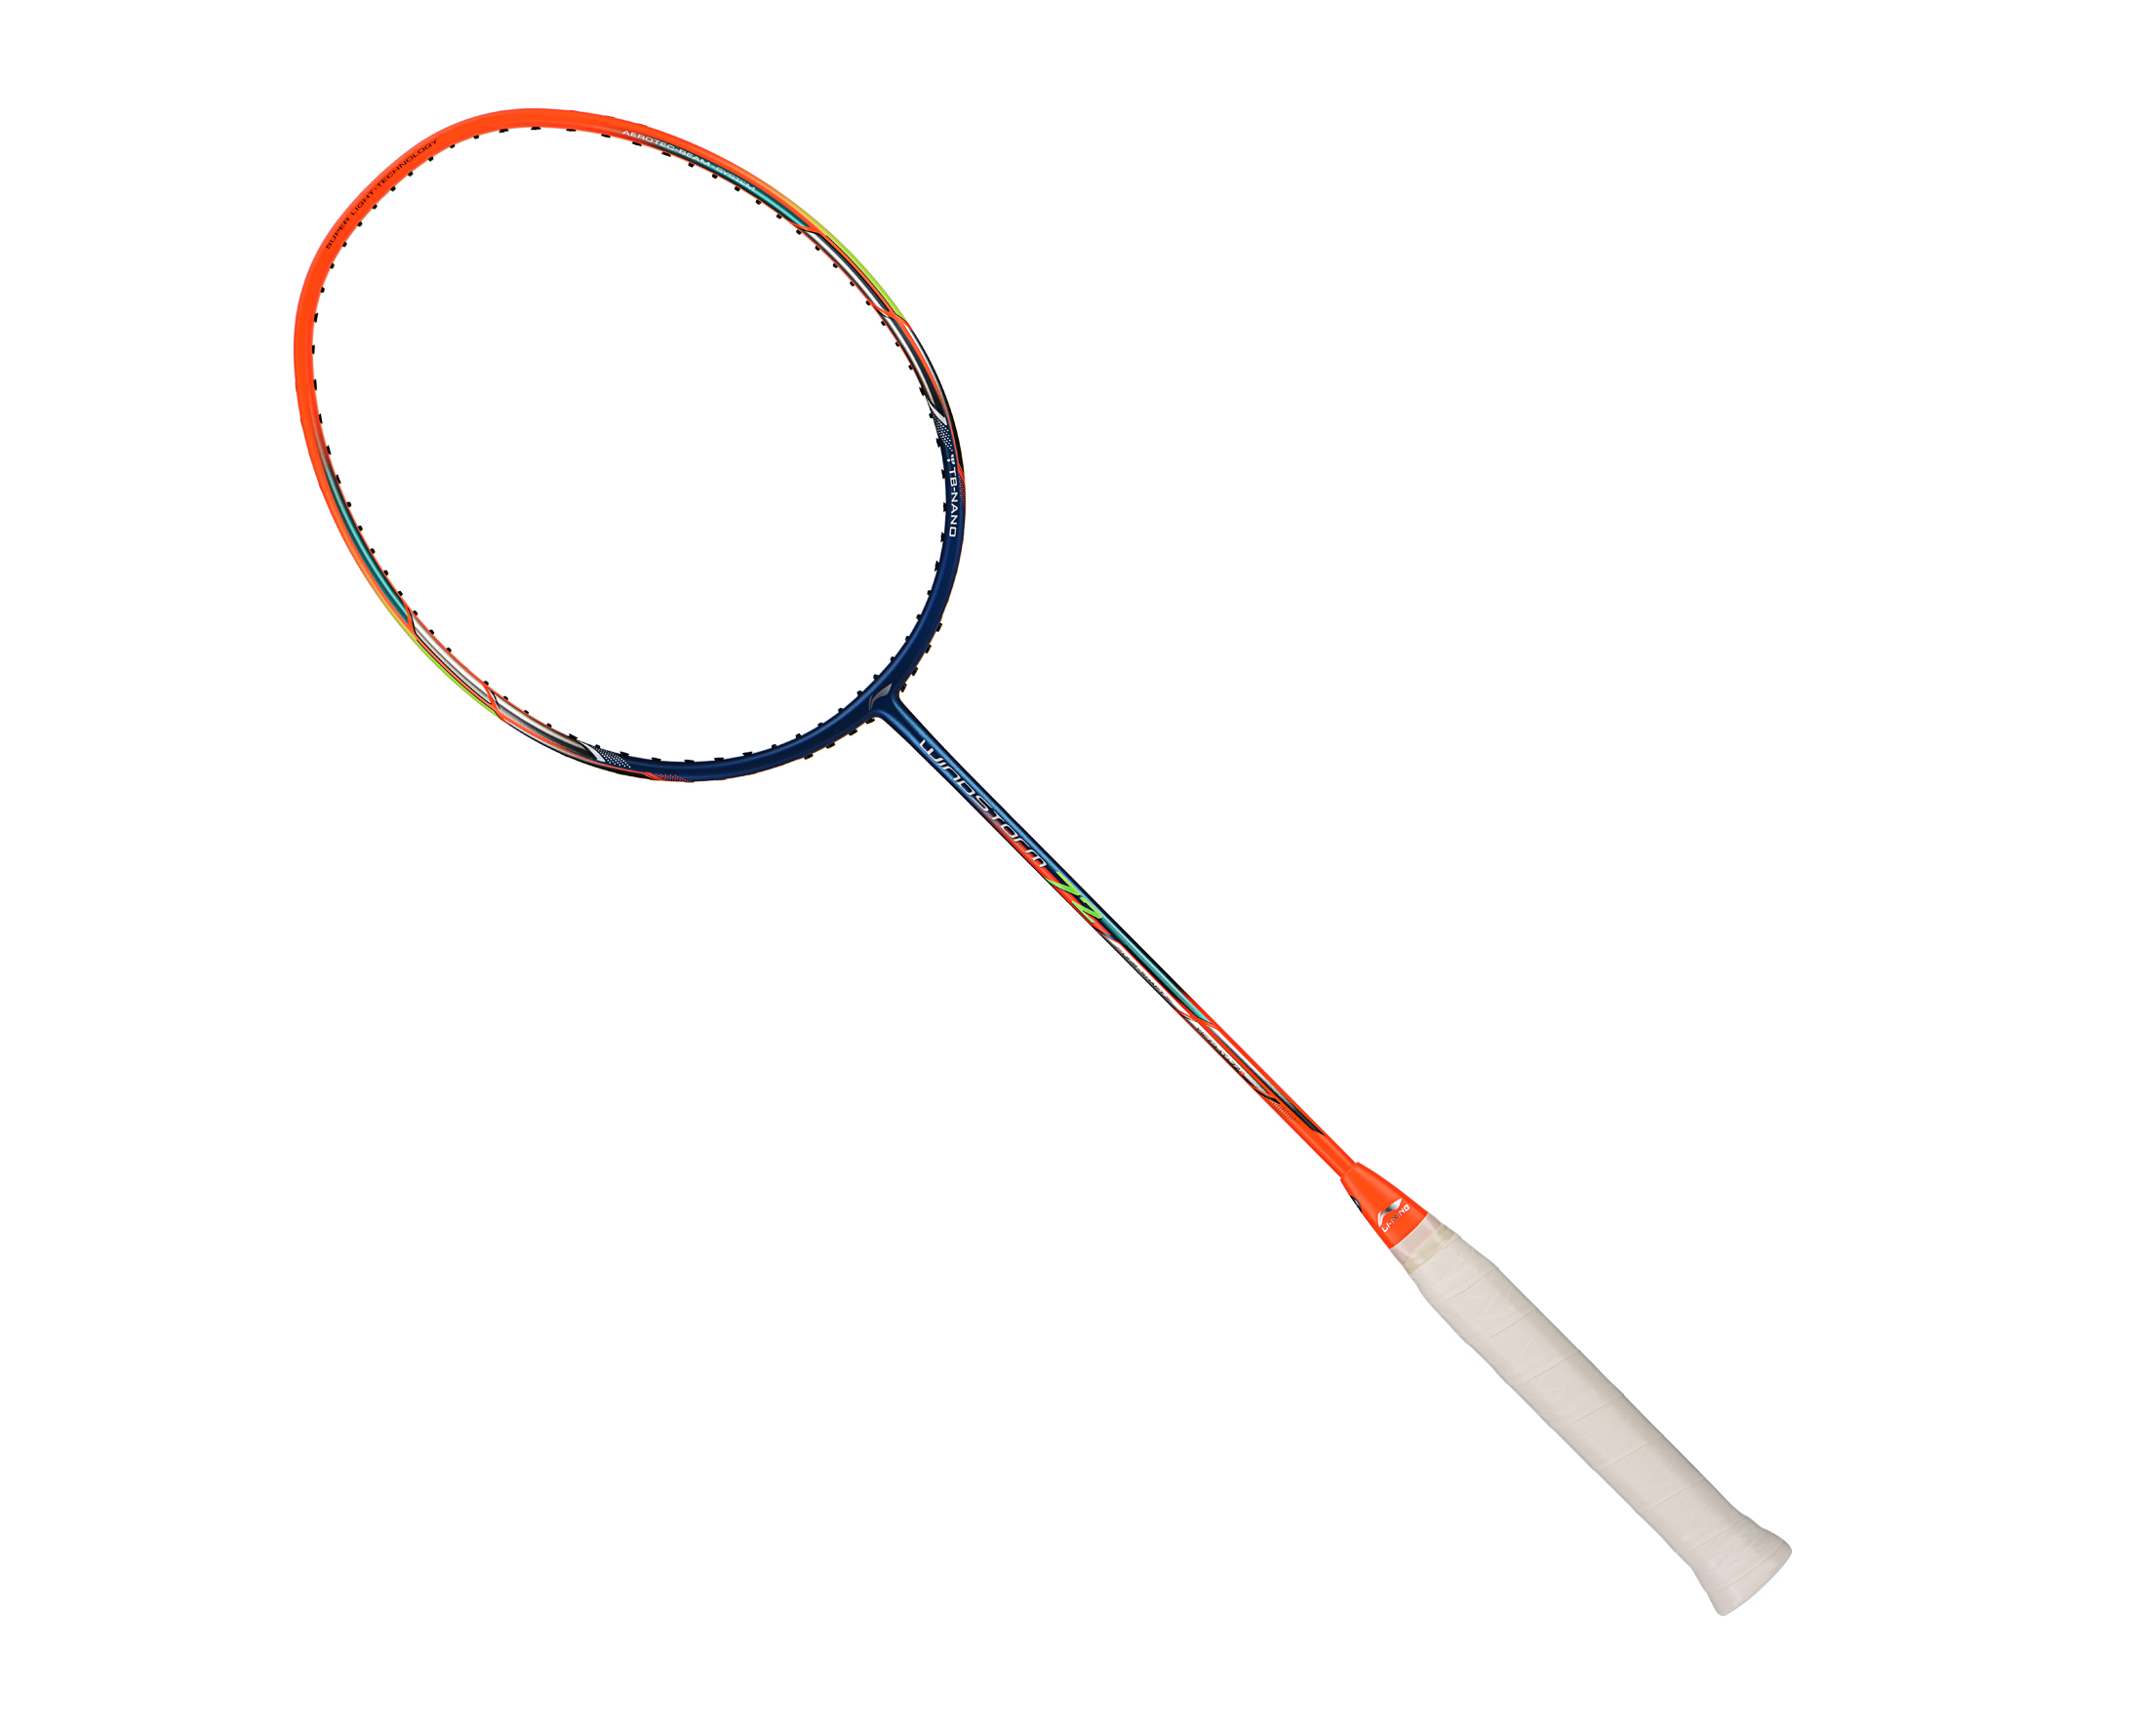 Genuine Full Carbon WindStorm 72 500 Raquette Badminton With Free Gift